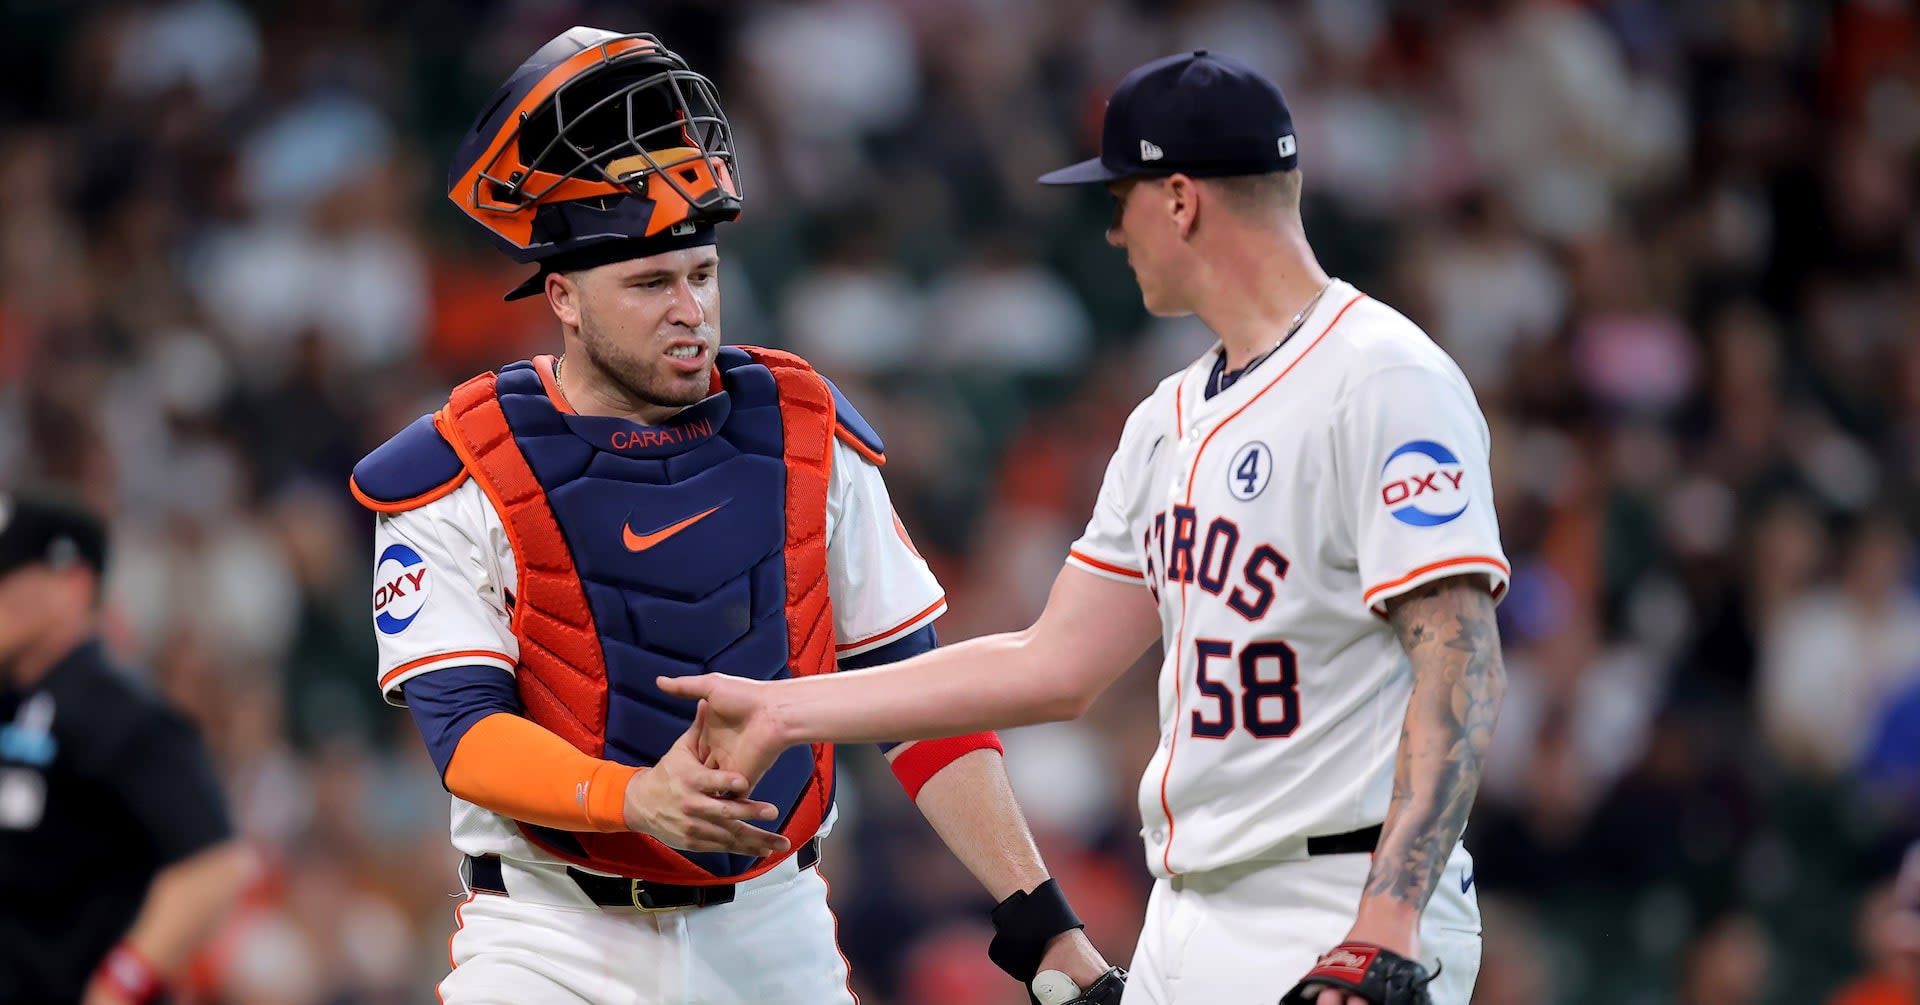 Four-run eighth lifts Astros past Cardinals